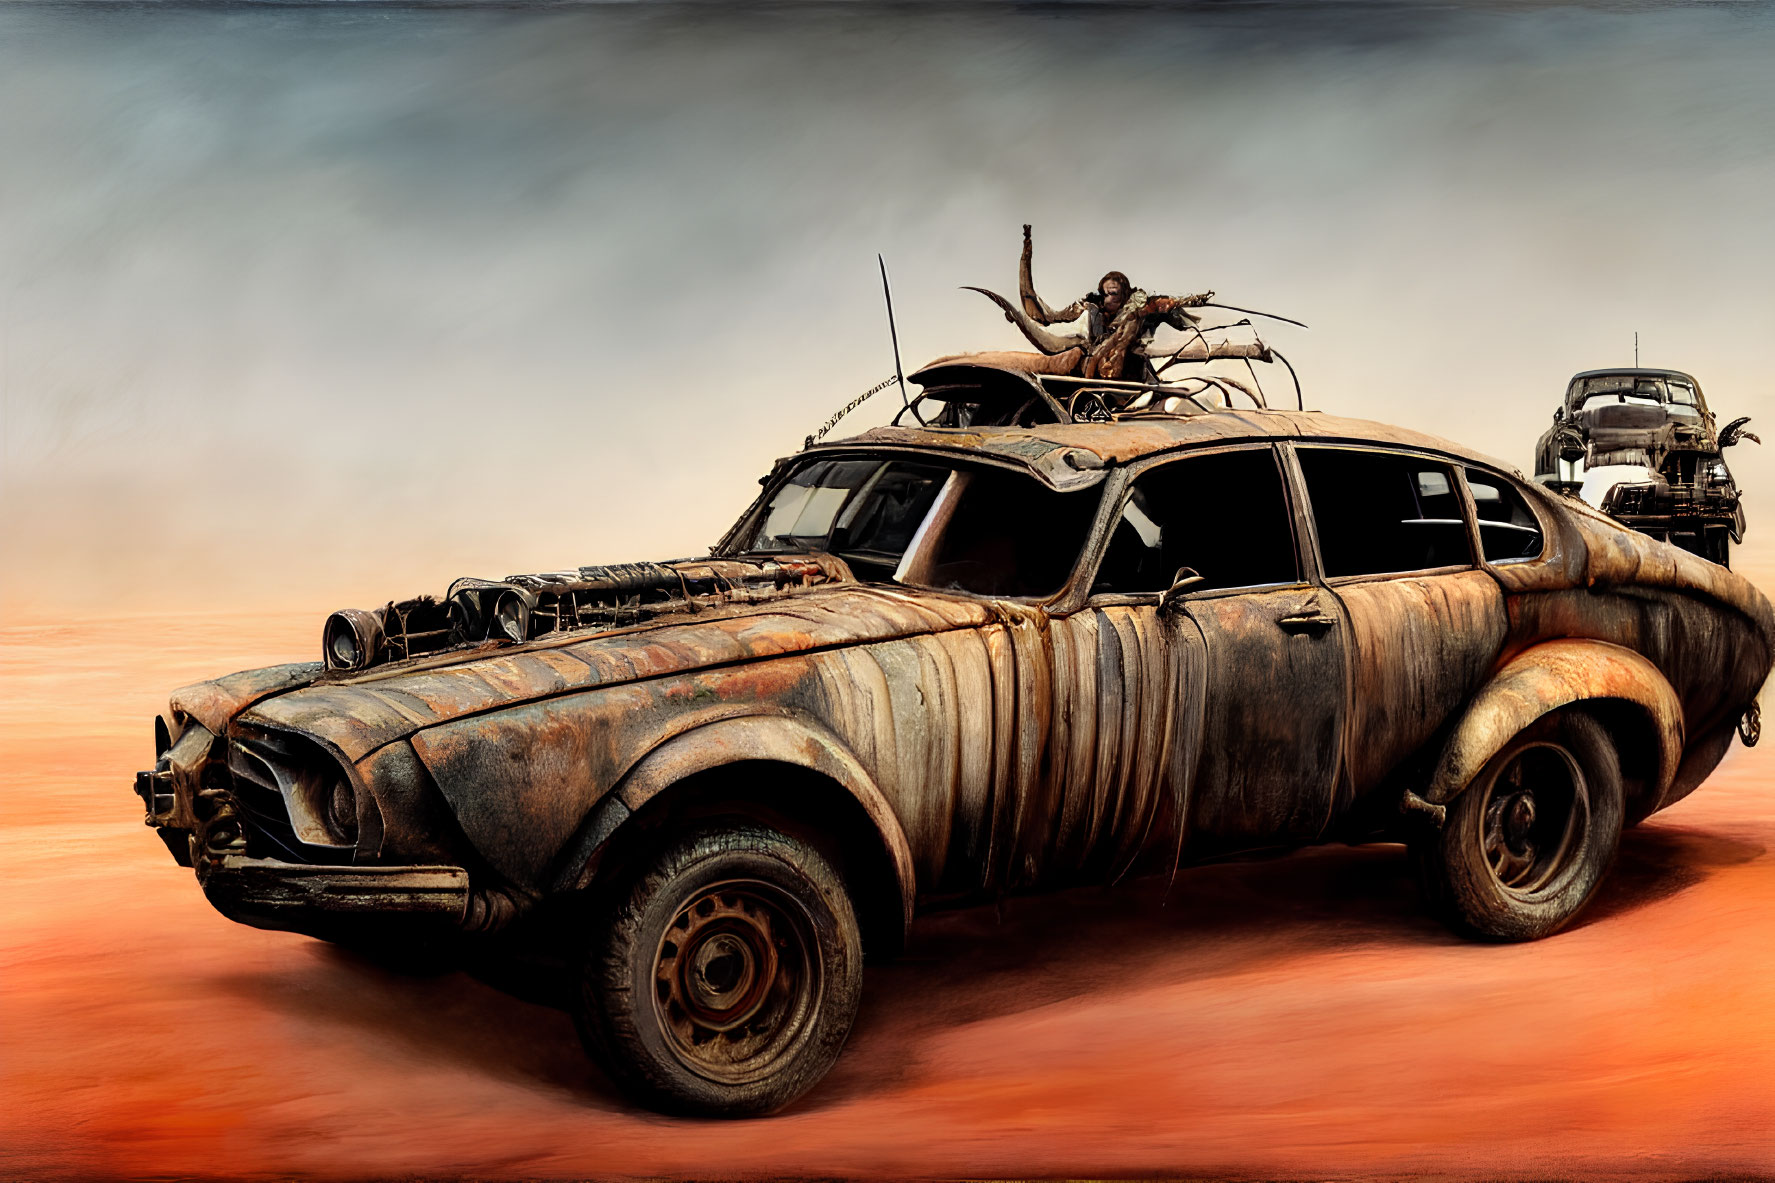 Rustic armored post-apocalyptic vehicle in desert with gesturing person